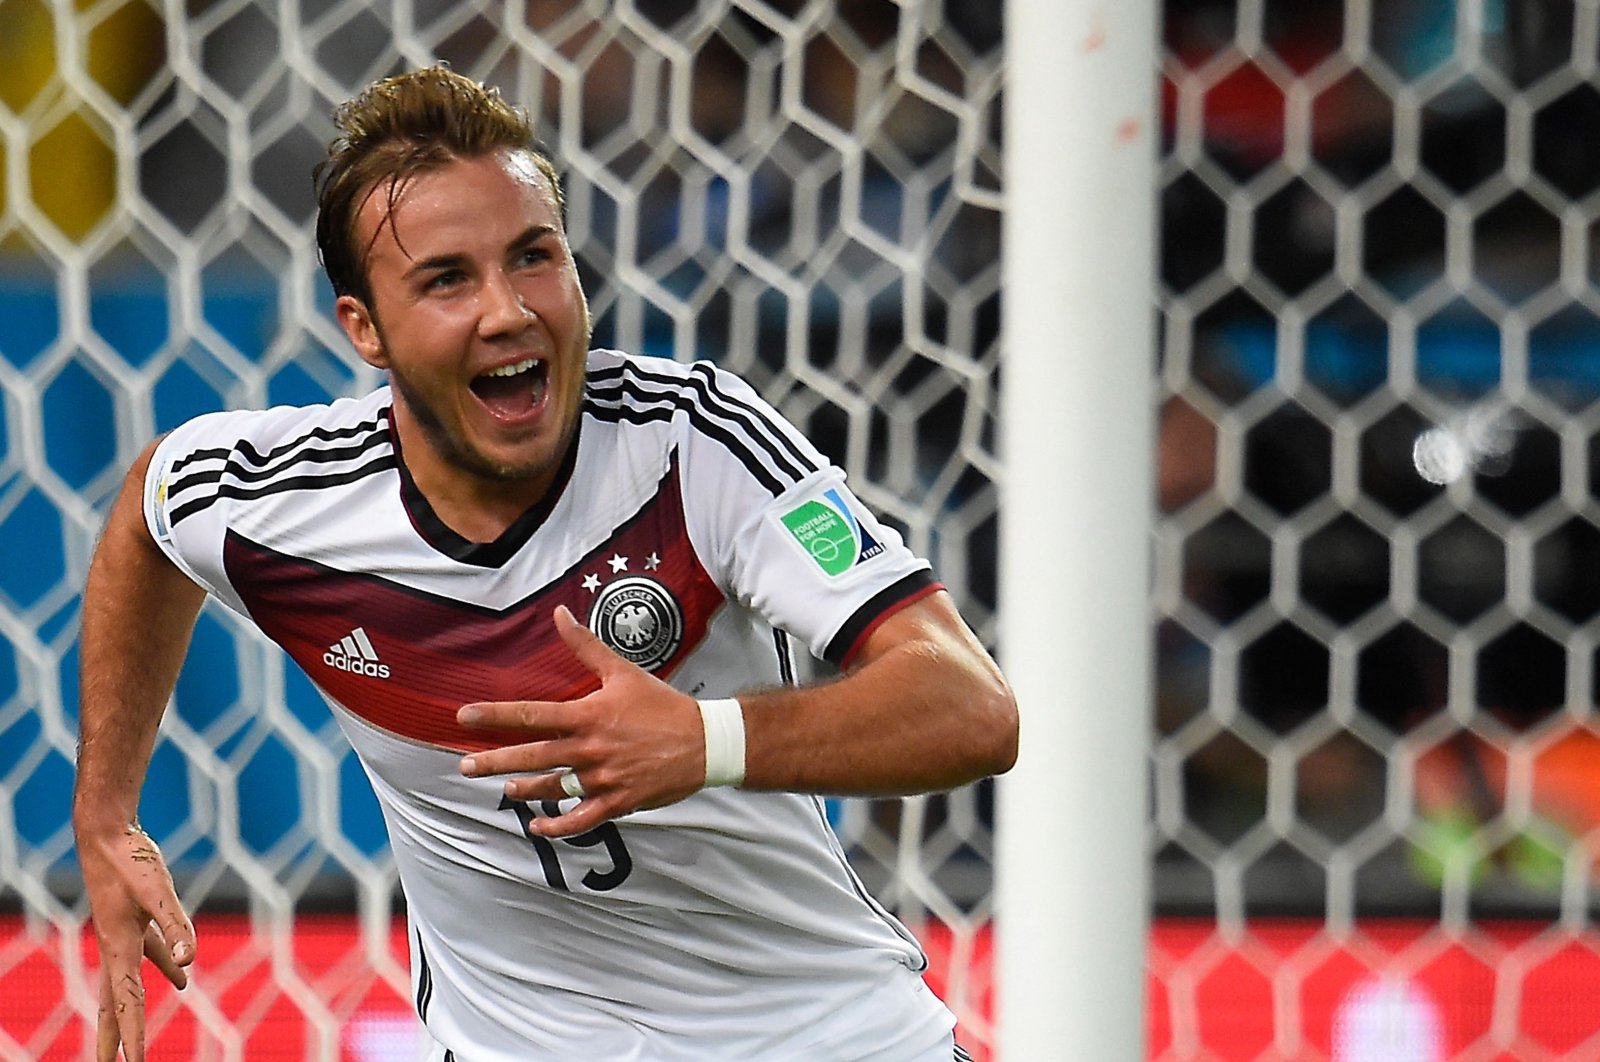 Germany&#039;s forward Mario Gotze celebrates after scoring the winning 1-0 goal during the second half of extra-time during the 2014 FIFA World Cup final football match between Germany and Argentina at the Maracana Stadium, Rio de Janeiro, Brazil, July 13, 2014. (AFP Photo)